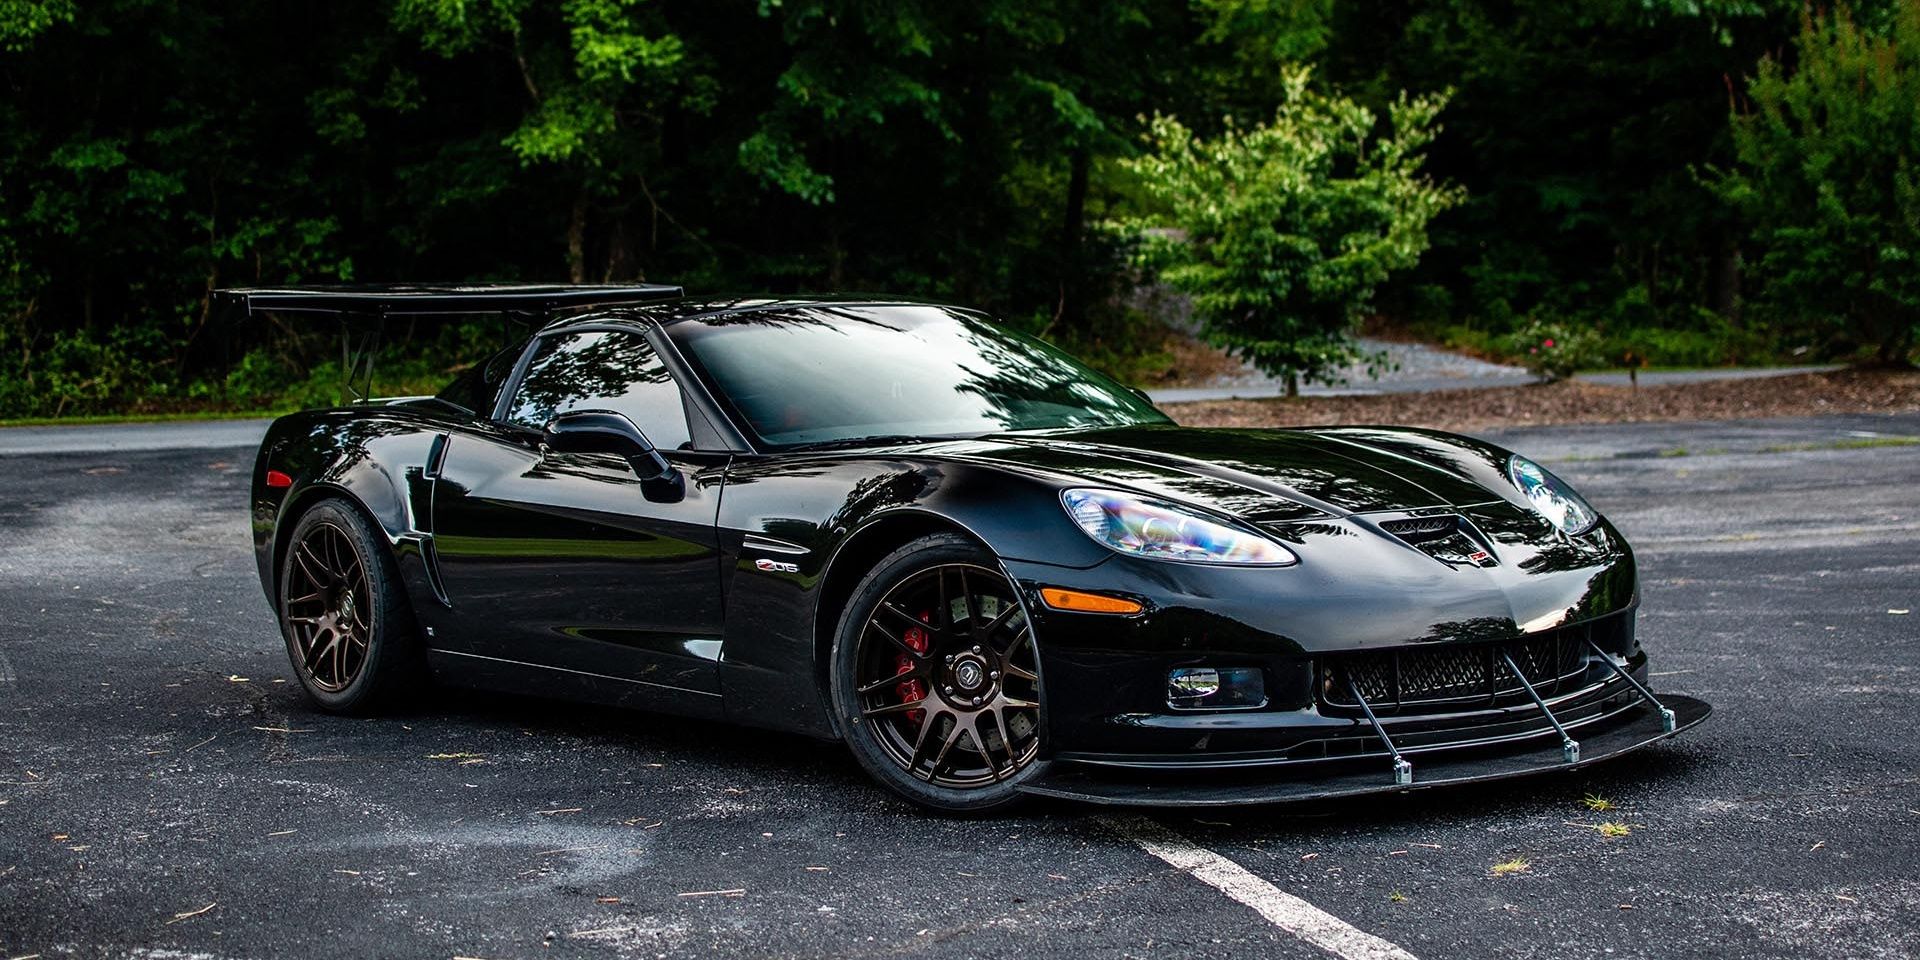 Are These The Sickest Modified Corvettes You've Ever Seen?